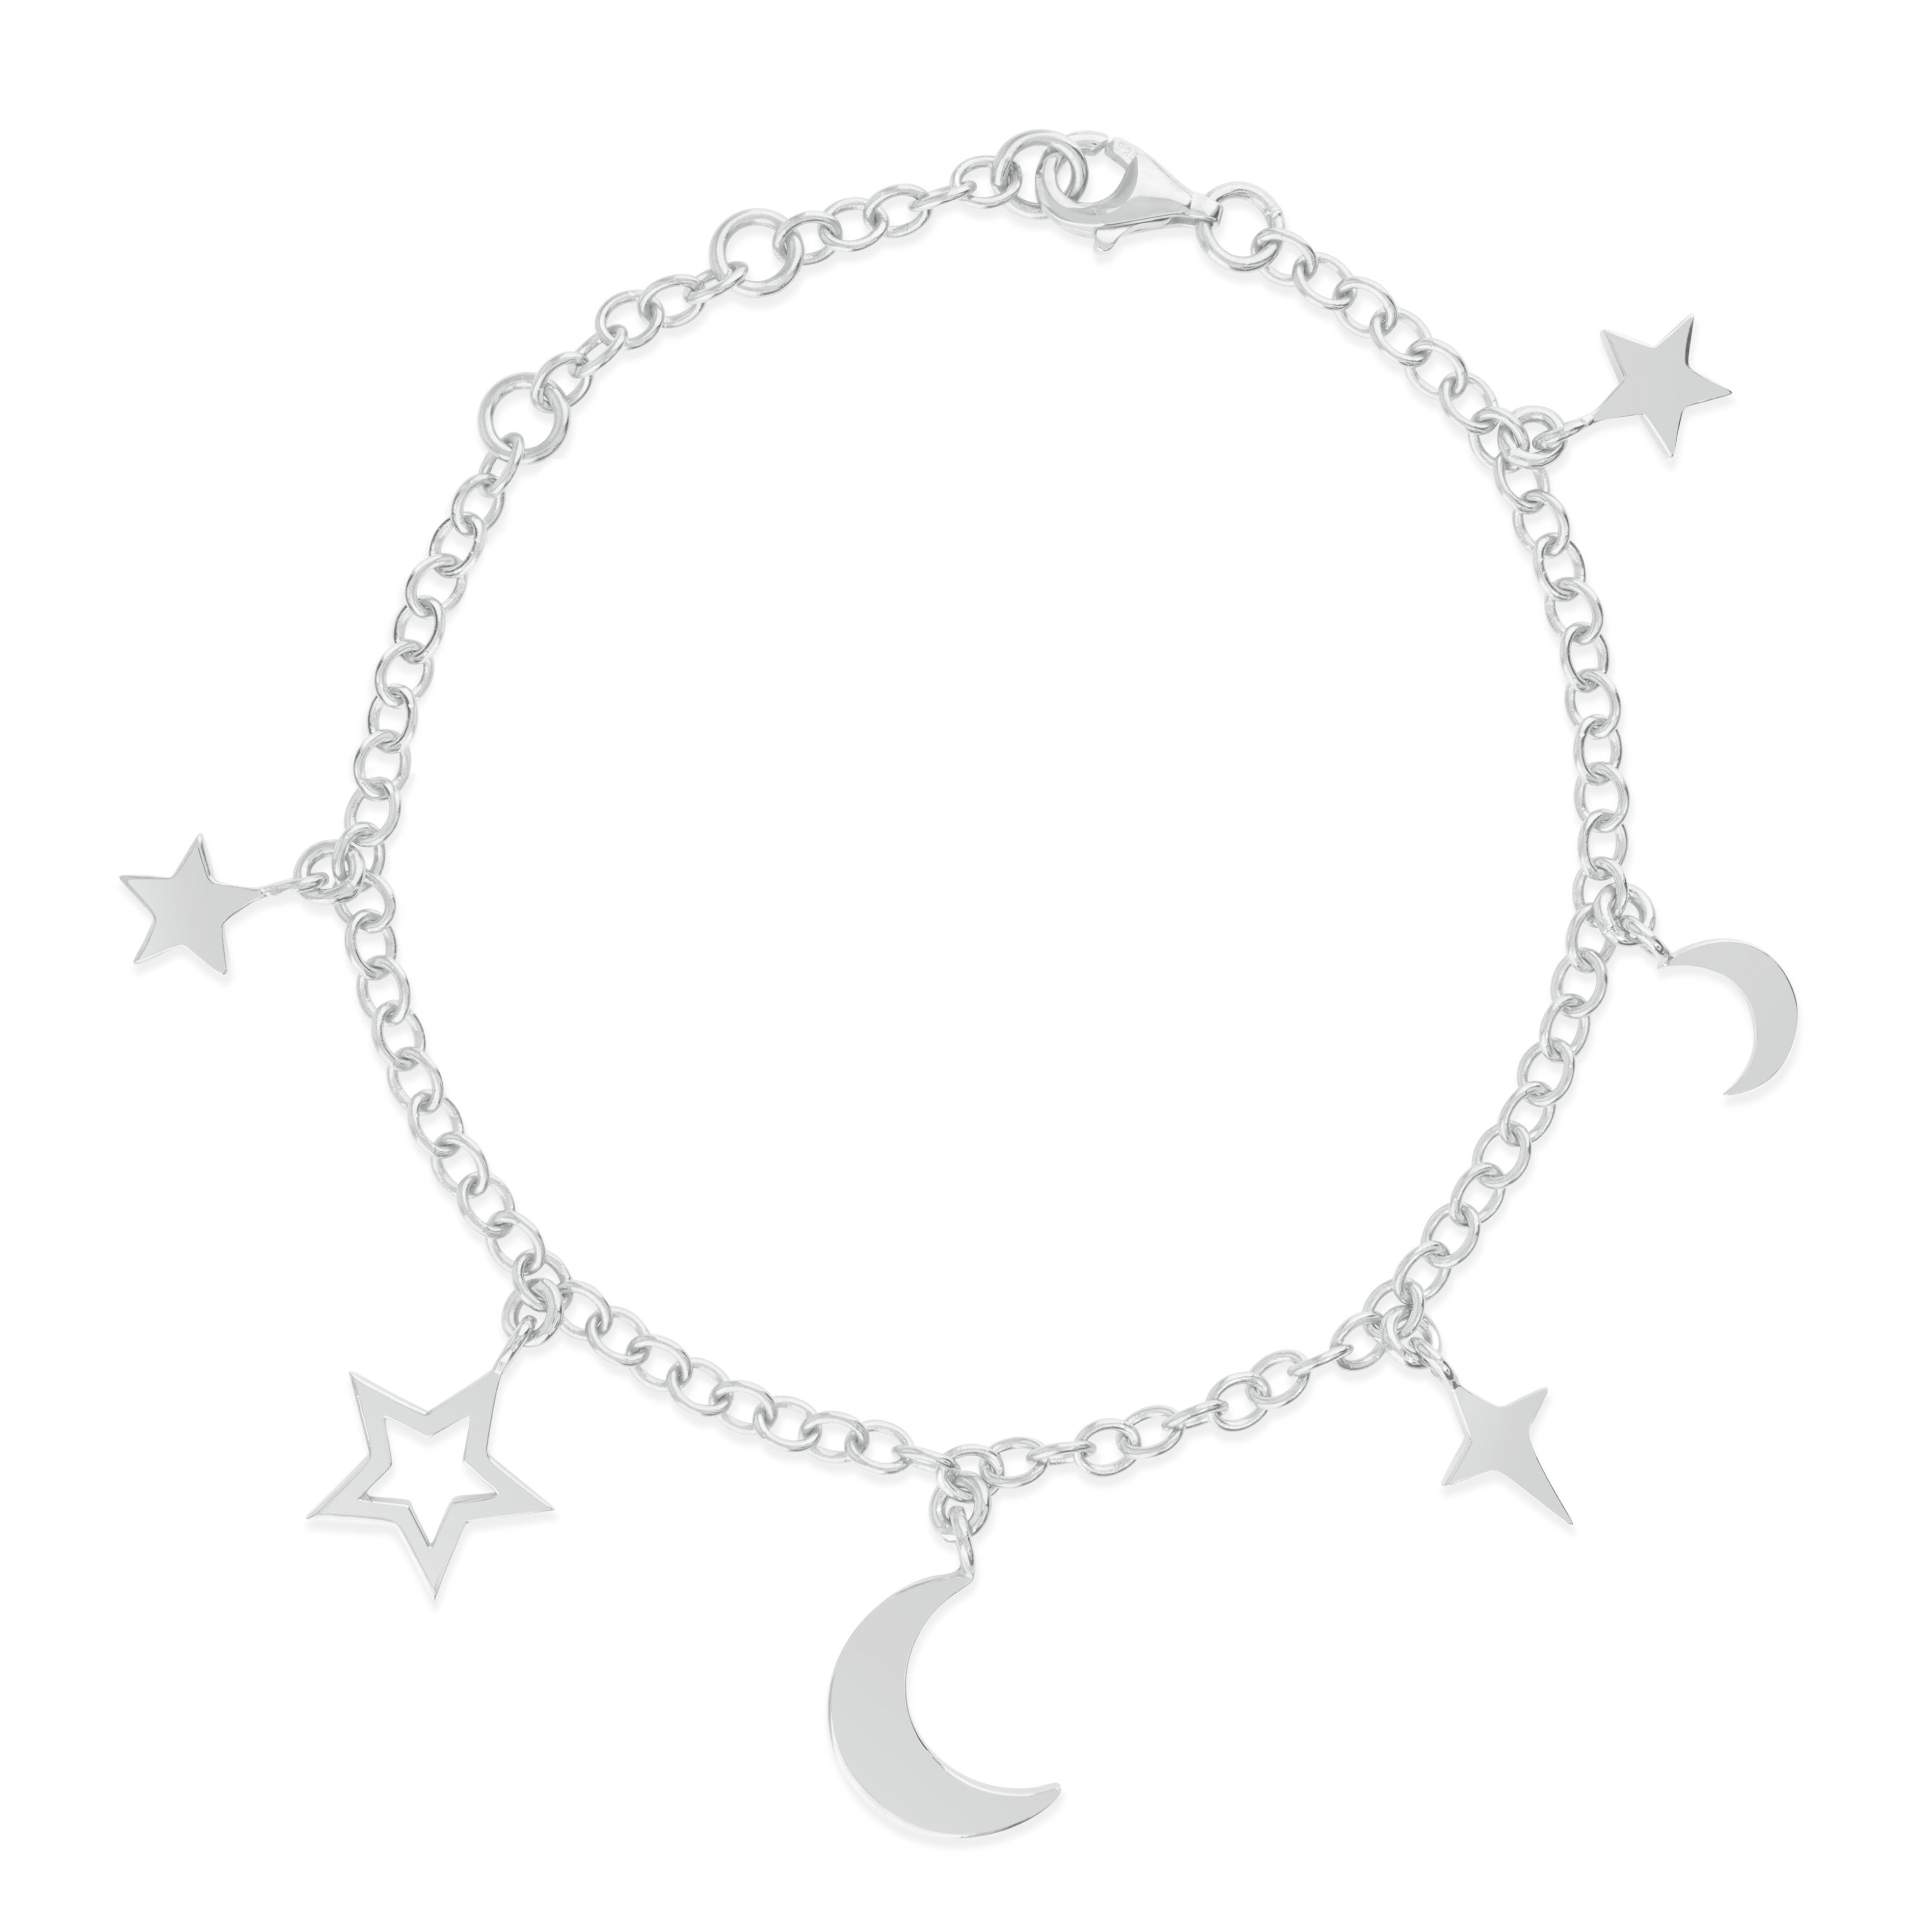 Silver Moon and Star Charm Bracelet